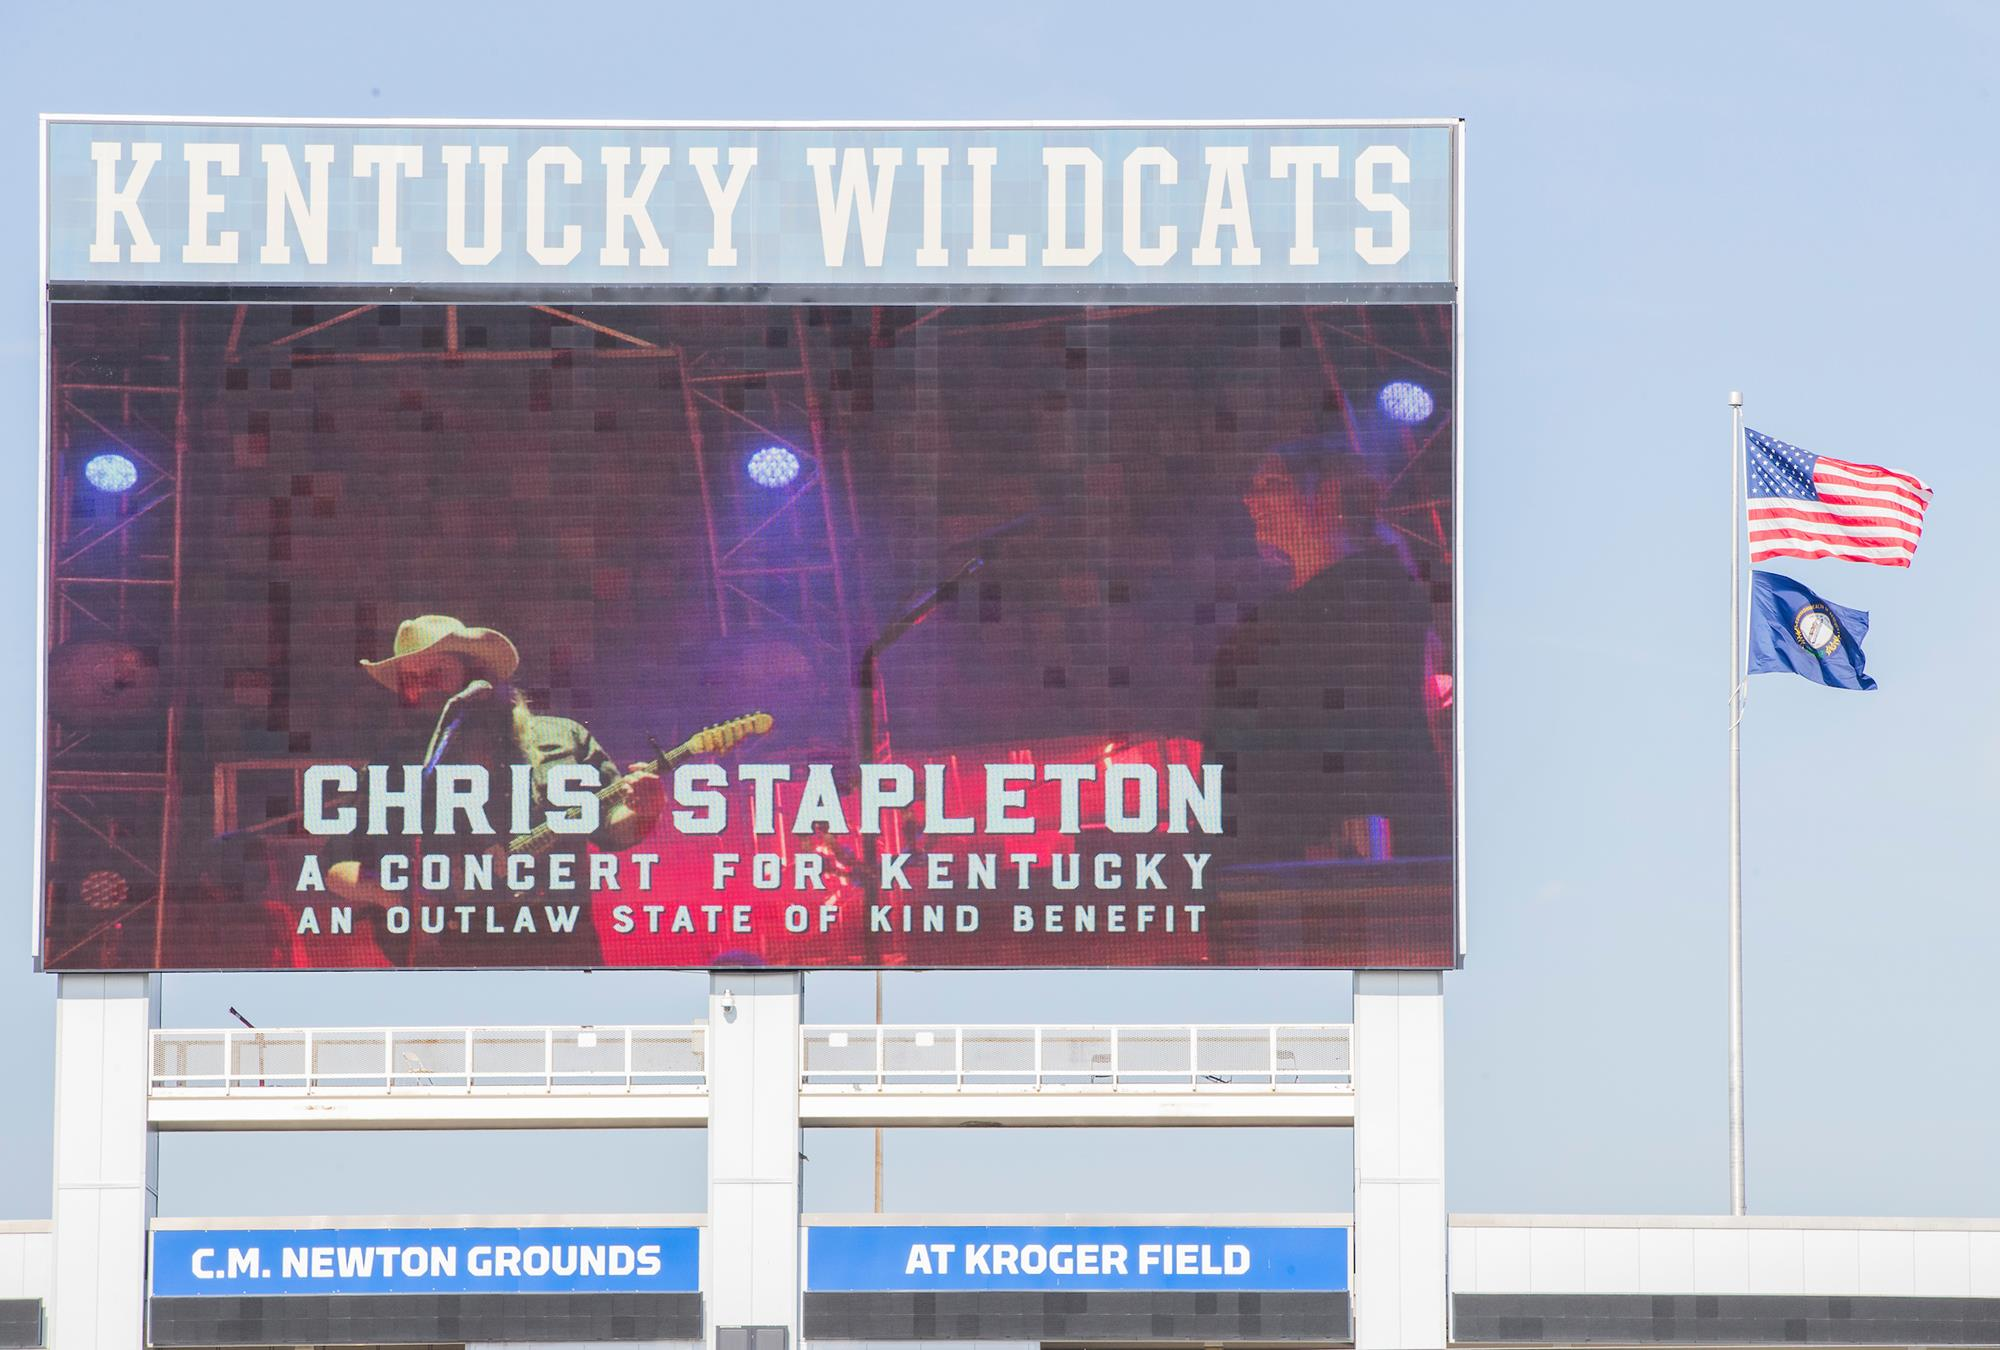 Important Reminders for Chris Stapleton’s ‘A Concert for Kentucky’